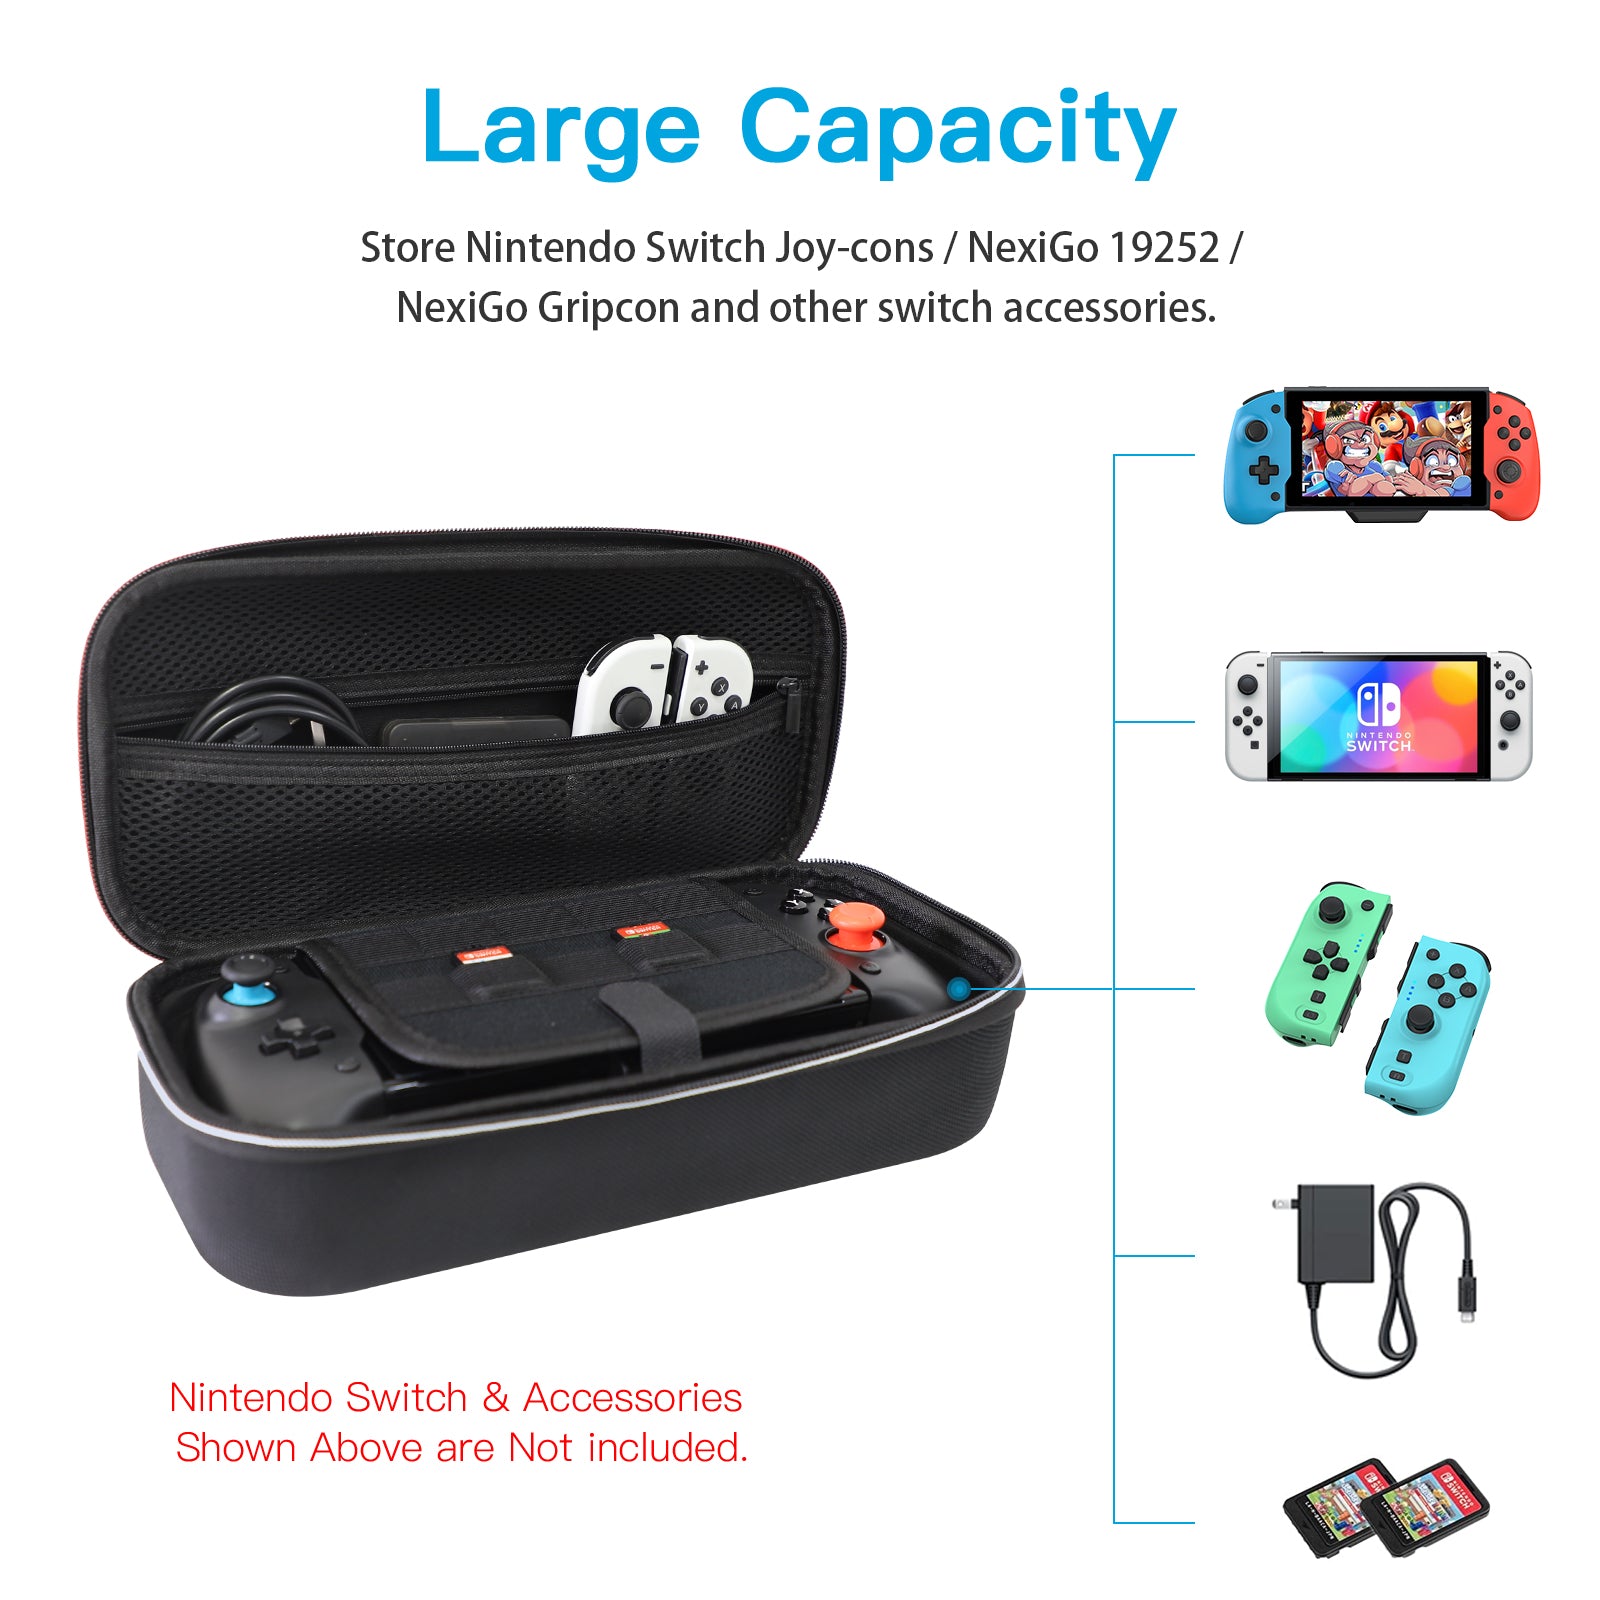 The case's can accommodates Joy-cons,19252, NexiGo Gripcon, and other switch accessories. 